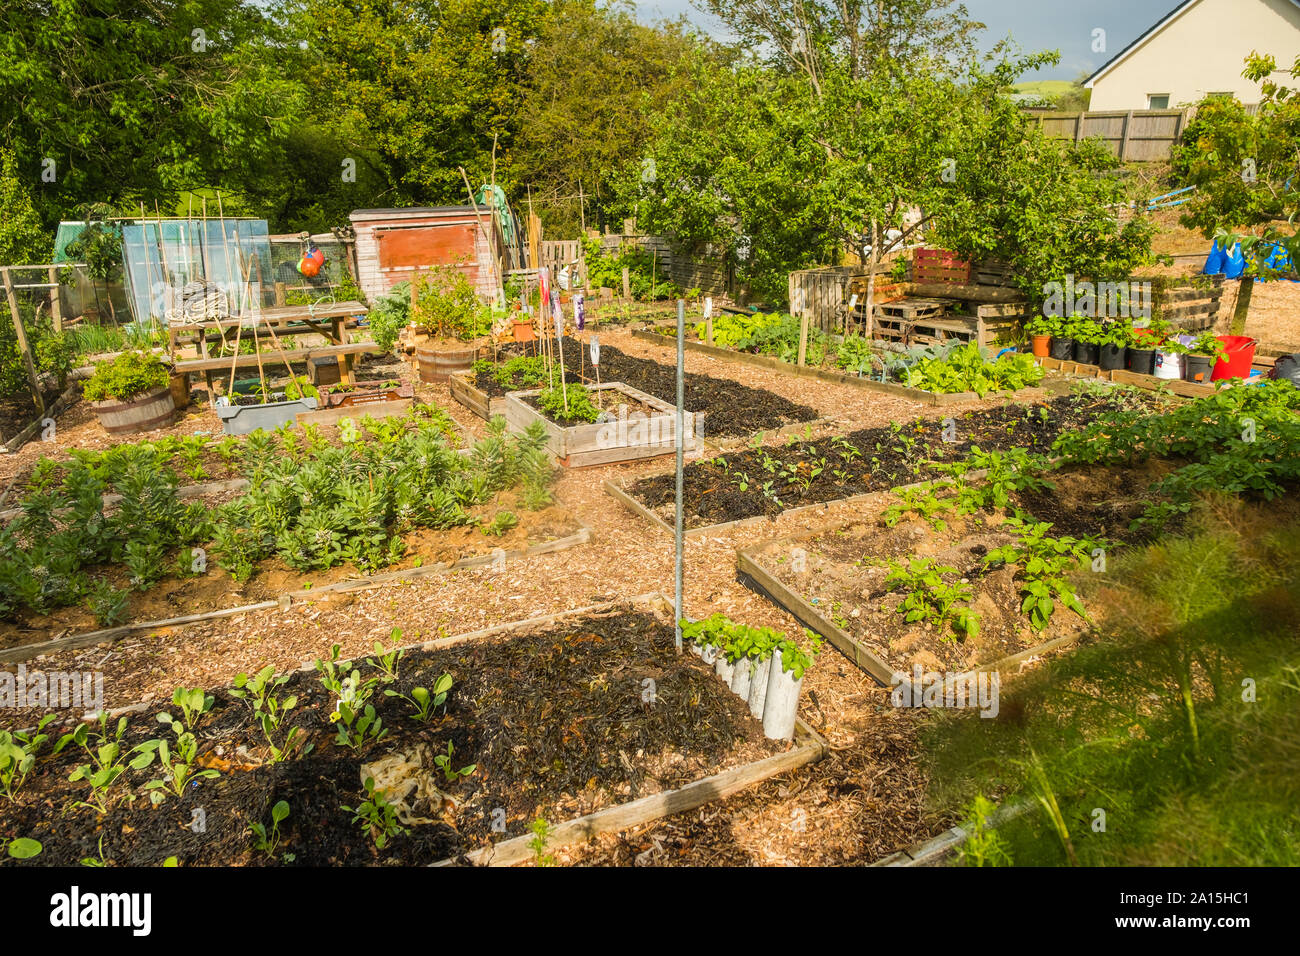 Allotment gardening in the UK - vegetables growing in raised beds Stock Photo